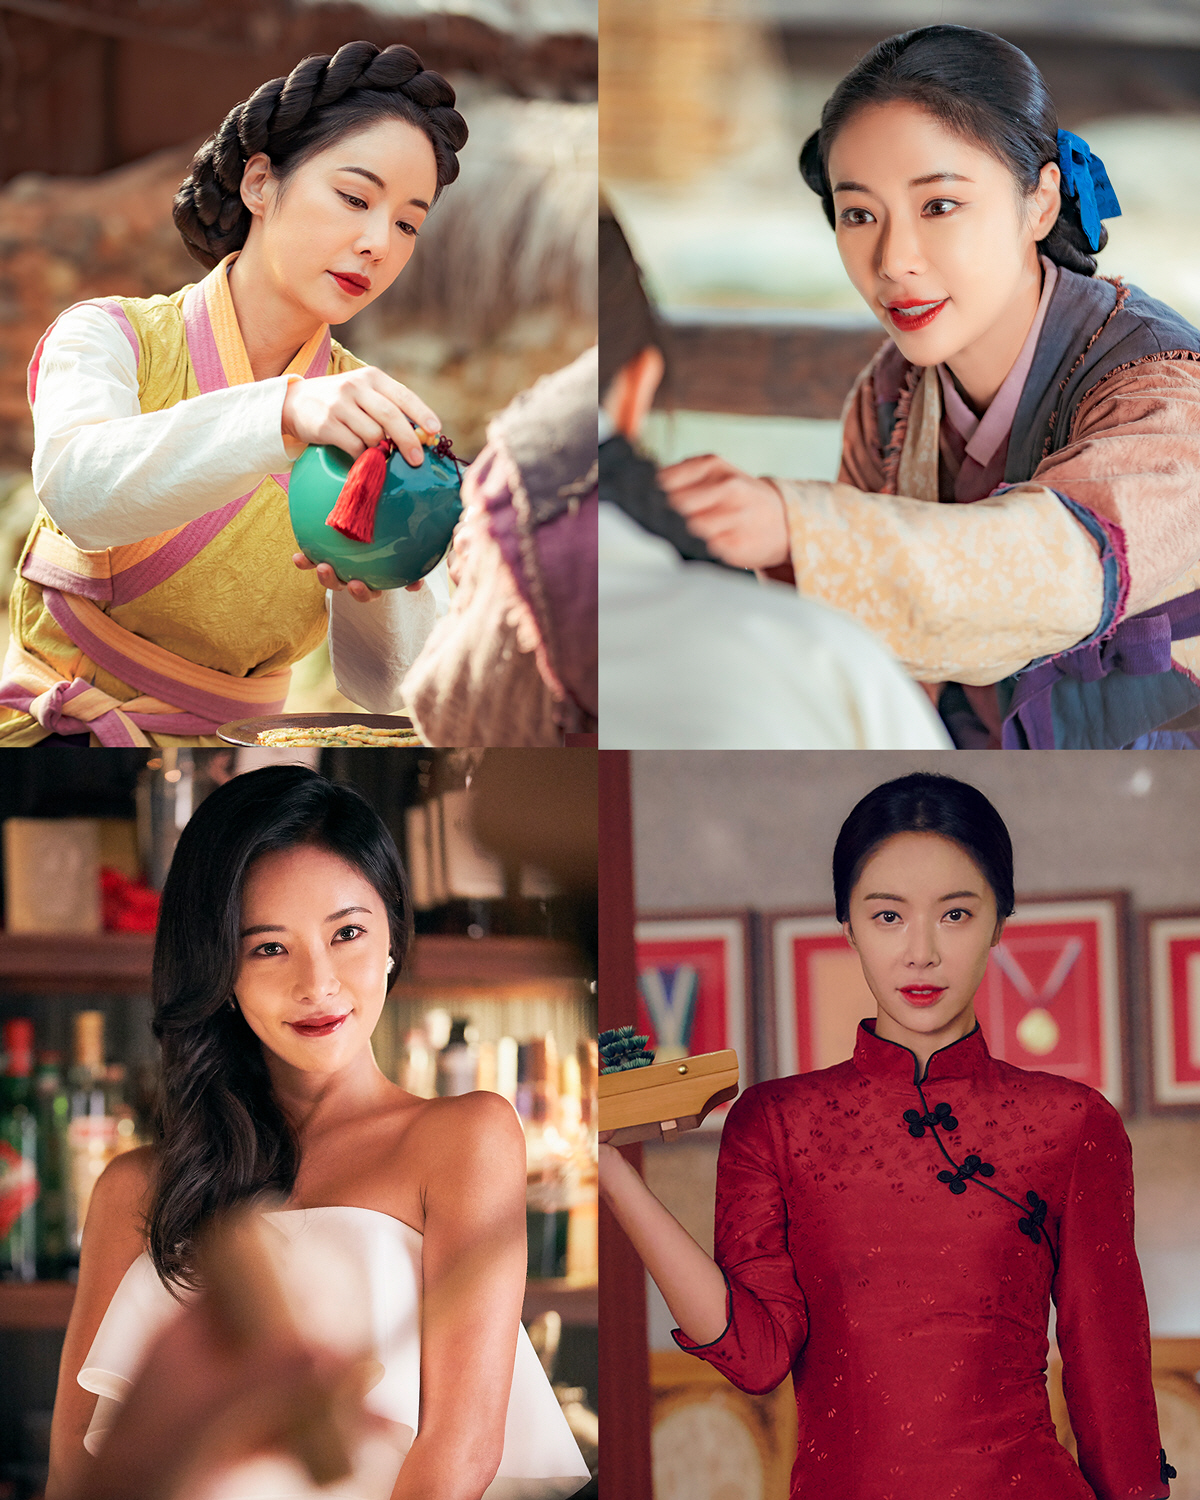 Pairs gloves sports car aunt Hwang Jung-eums timeless transform was foreseen.From Korean traditional clothing to Chipao, the colorful styling for Winning counseling stands out.JTBCs new tree drama Pairs gloves sports car (playwright Ha Yoon-ah, director Jeon Chang-Geun, production Samhwa Networks, JTBC Studio) is a fantasy counseling drama that releases the gruelling aunt of a mysterious stall and a pure youth alba student in the dream of their guests.The monthly week (Hwang Jung-eum), which requires 100,000 people to be released to pay for the past life, is a win counselor with a whopping 500 years of experience.From the Joseon Dynasty to the present day, the struggle of the moon is buried in her styling.As the voice of the moonlight artist, Do you know what it is easy to push into human dreams and to take care of it?, The history of the world counseling is long and long.First, it is noticeable that the moonlight, which listens to a lot of the guests stories as the owner of the double-ended house, is visible.A drink will bring you to sleep, and in the meantime, a strange twin-gap state that can enter into your dreams has been together with the long history of the moon.As time passed, Monthly was also a bartender for the twin-gab bar, and to fill the performance, it would listen to the stories of foreign guests.I went from the main bar to the wine bar and released peoples hearts, but I left the last 10 people and my performance was cut off.Pairs gloves sports car is waiting for guests, but there is no one who comes to Foa or talks about a drink, so we are still trying various transforms.Wearing Chipao and serving directly, we are engaged in a full season.The production team said, The reason why the monthly styling repeats infinite transform is because many Episodes appear in the play.Episode in the original webtoon, Episode in the reality, and Lottery Lottery with laughter and tears will be with viewers. Pairs gloves sports car is set with a delicious snack, and a delicious Episode will be set up in the play with empathy and fun.I would like to ask for your expectation and affection until the first broadcast that is not long. On the other hand, Pairs gloves sports car is based on the same name webtoon by Bae Hye-soo, who won the Excellence Prize at the Korea Cartoon Awards in 2017 and earned a score of 10 points from readers during the next webtoon series.The drama God of Work, Family Why are you doing this, and The Package director Jeon Chang-Geun will complete the drama with a delightful and delicate touch that comforts the tired people.It will be broadcasted at JTBC at 9:30 pm on Wednesday, May 20th.